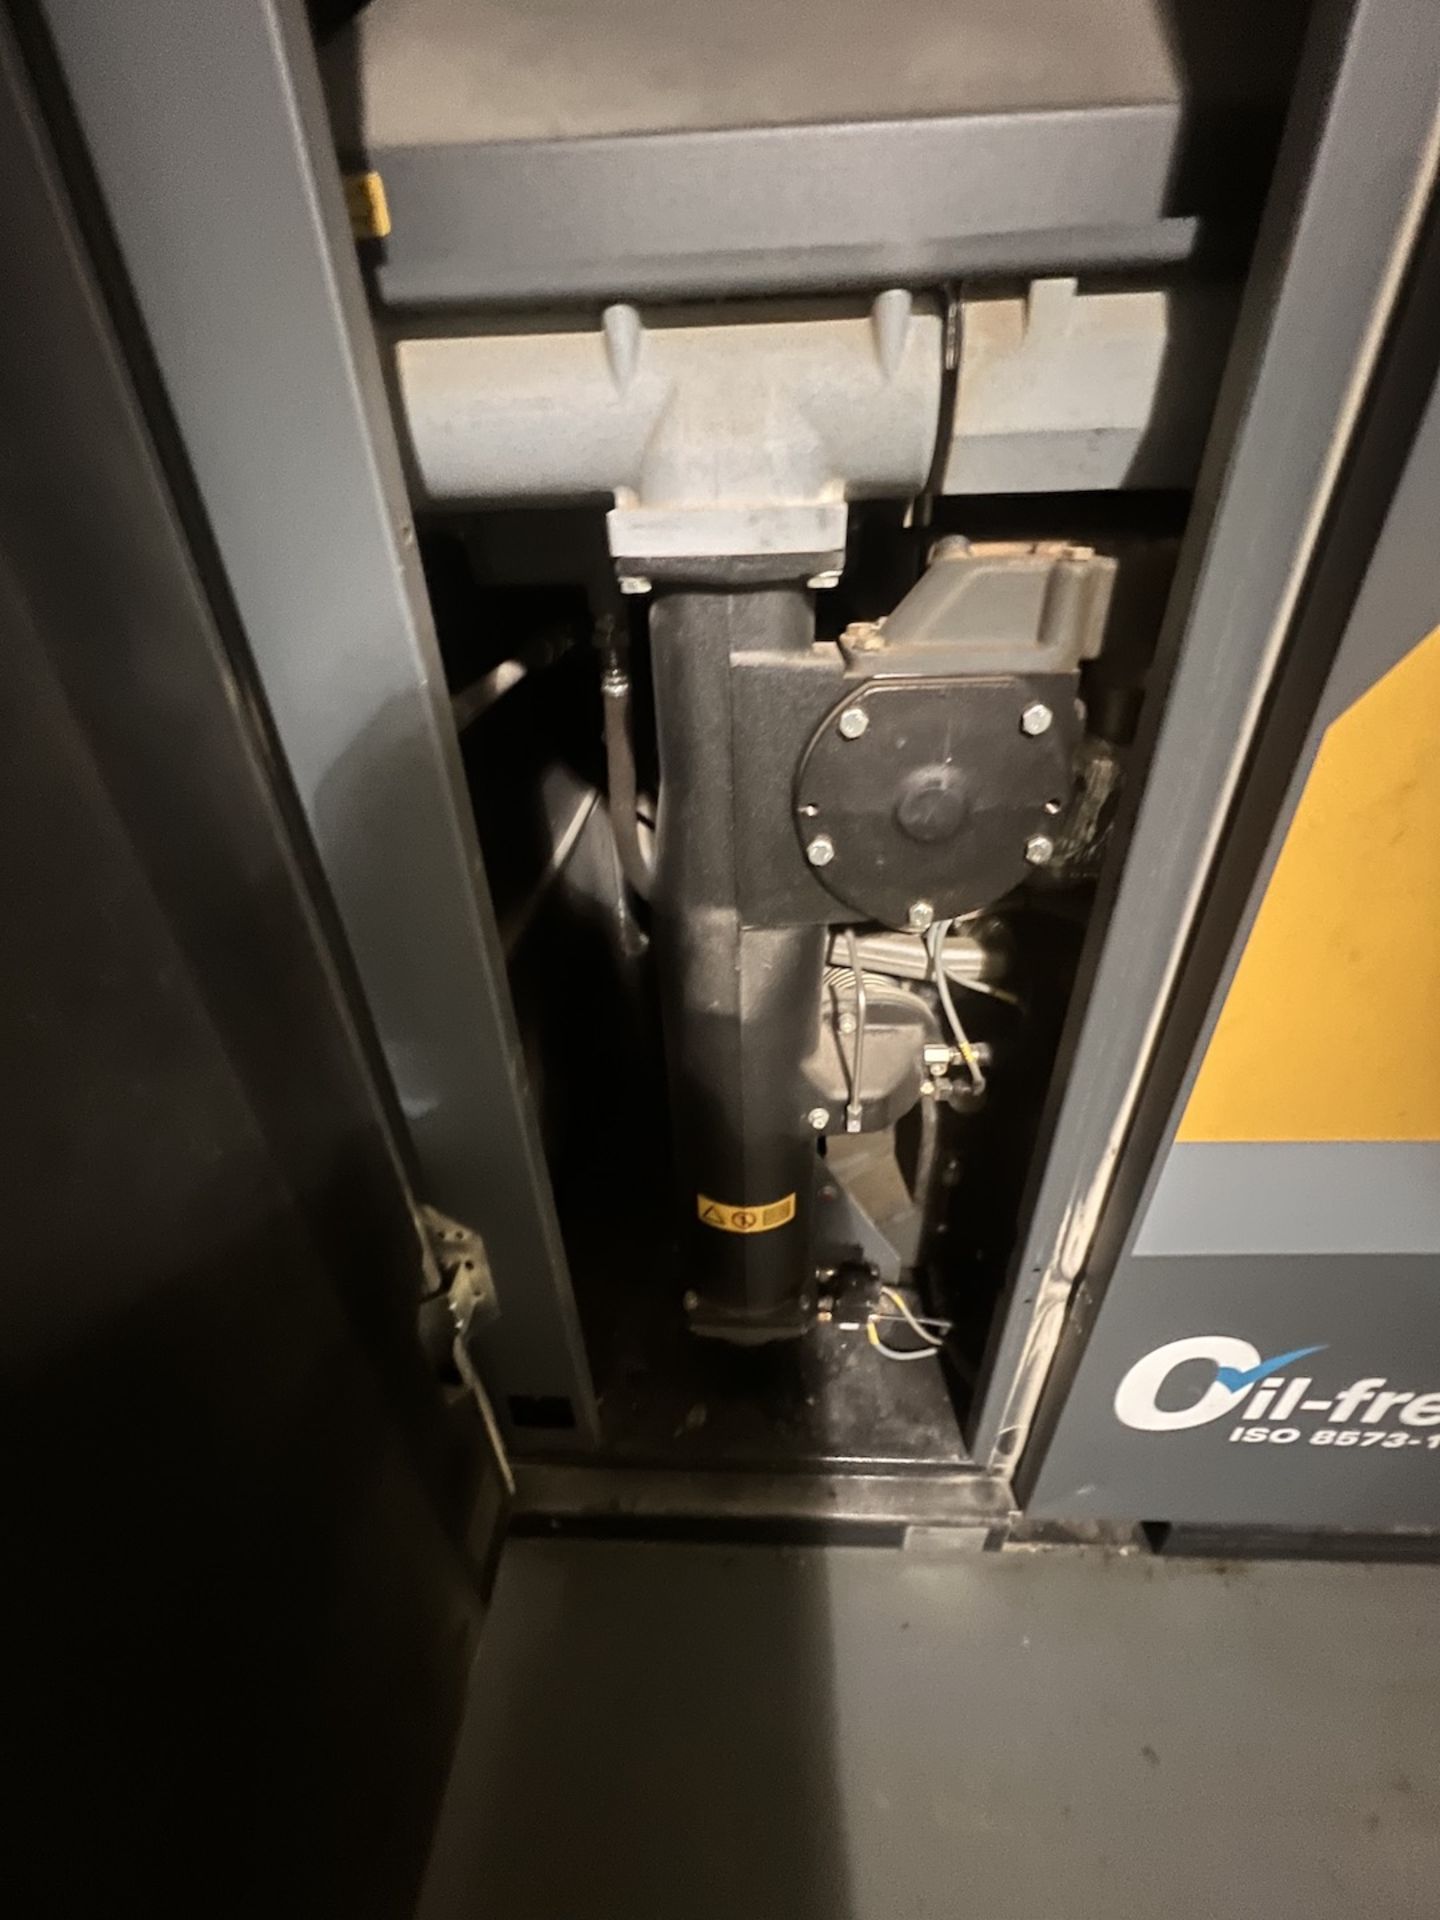 2019 ATLAS COPCO AIR COMPRESSOR, MODEL ZT90VSD-FF, S/N AIA 0116669, APPROX. 17,404 HOURS, IMD 260 - Image 12 of 26